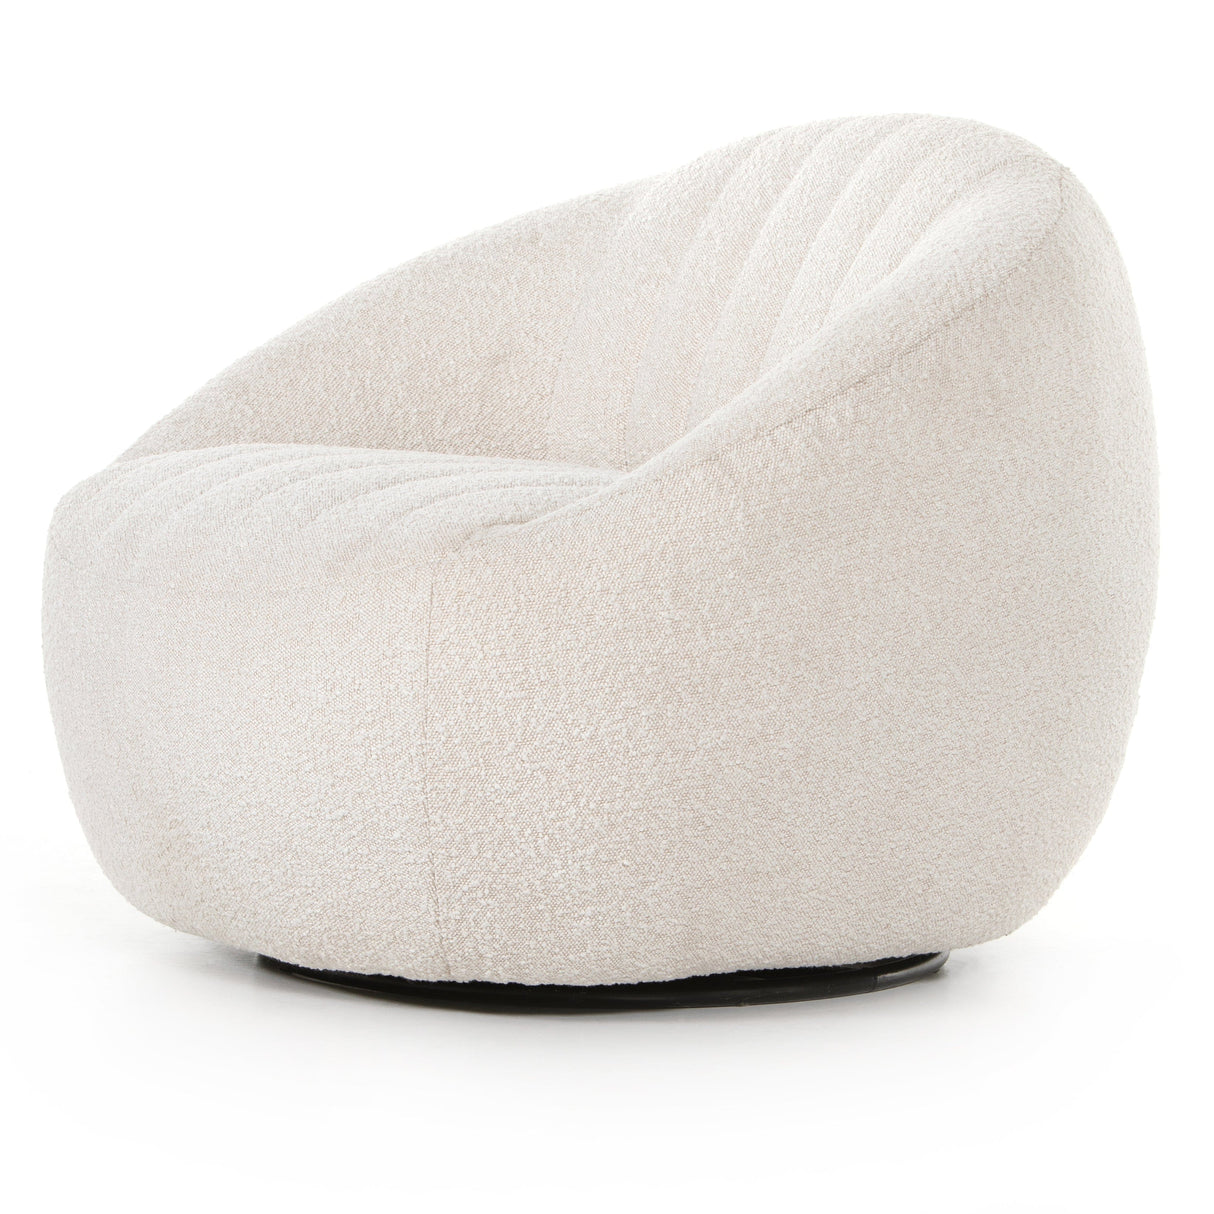 Four Hands Audie Swivel Chair in Performance Fabric Furniture four-hands-226408-003 801542716837